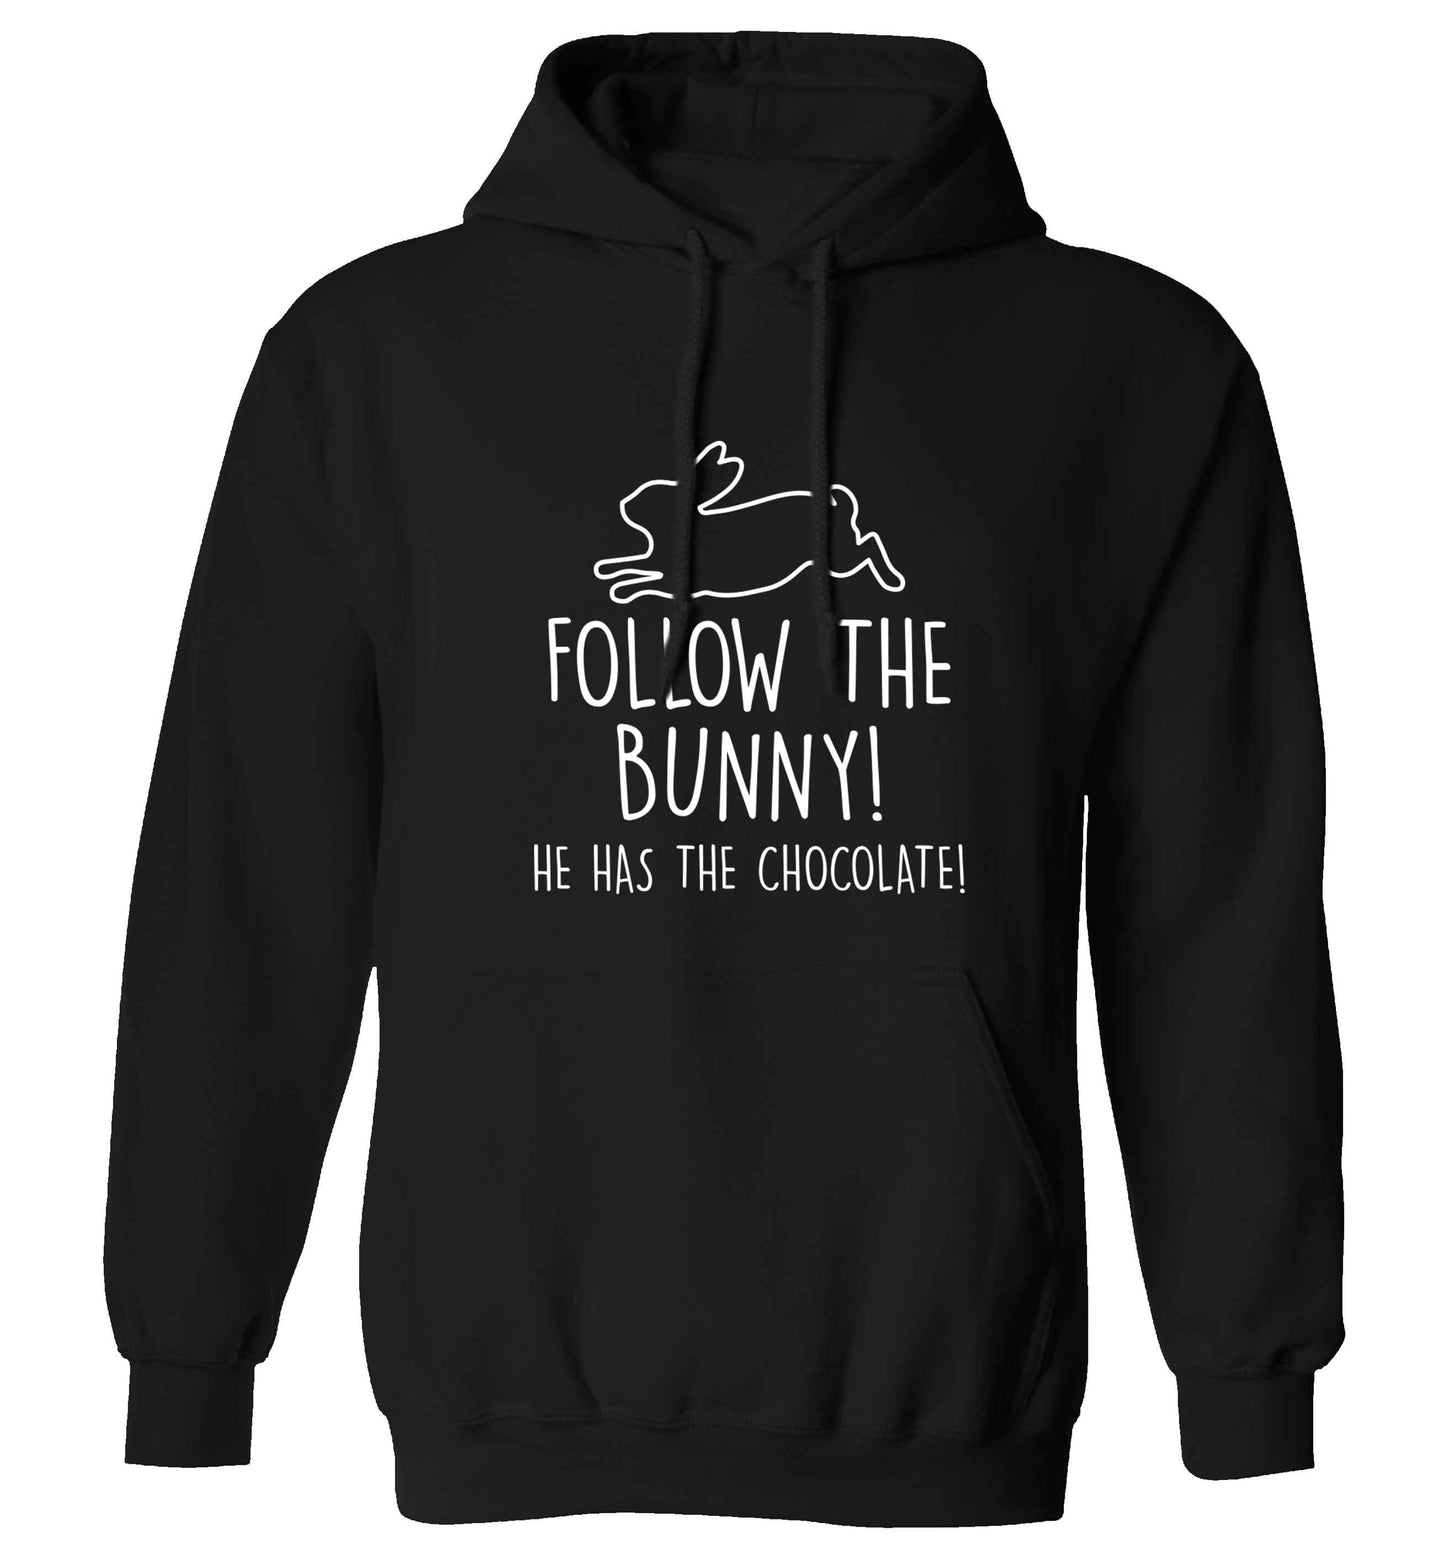 Follow the bunny! He has the chocolate adults unisex black hoodie 2XL